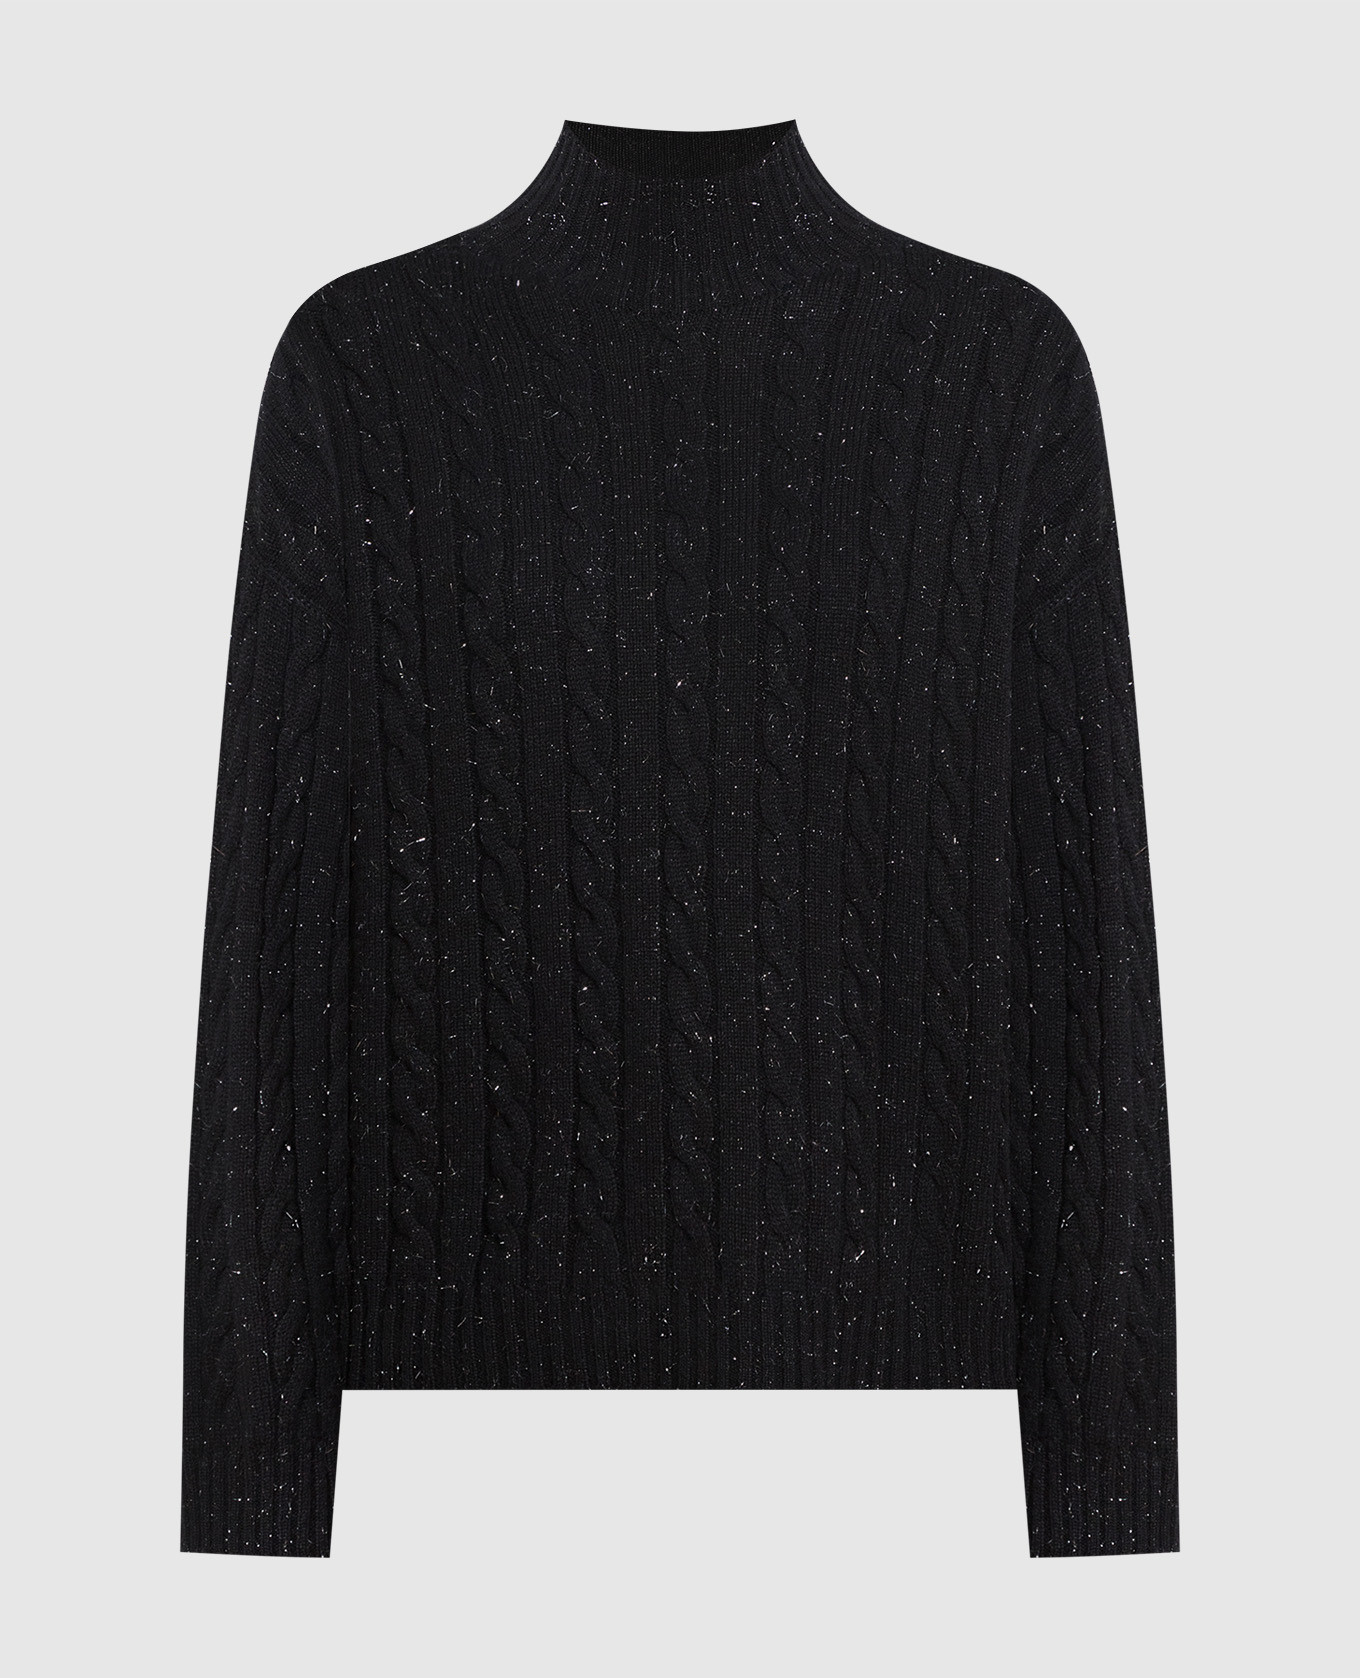 Black sweater with a textured pattern